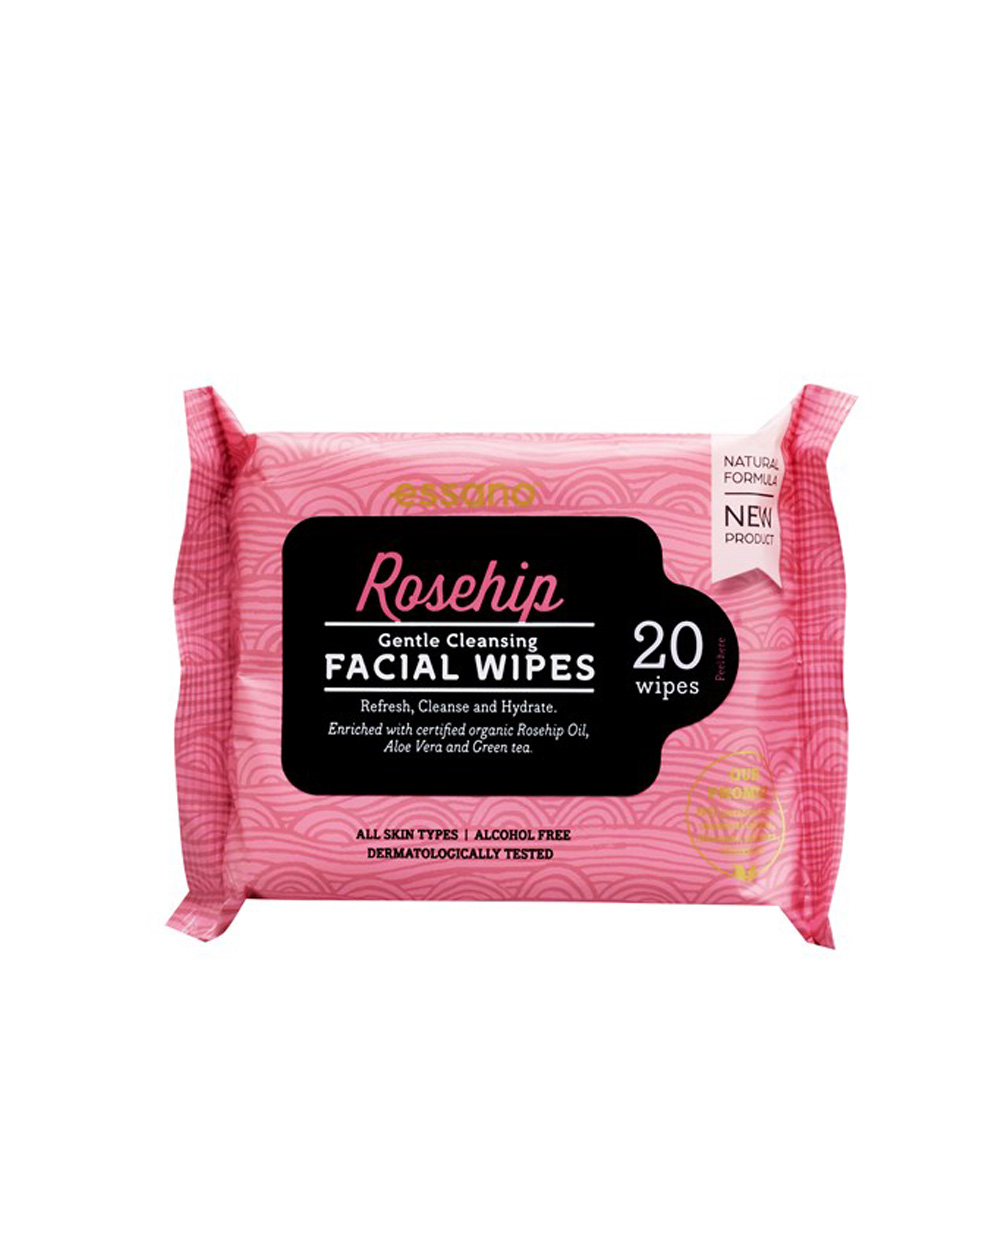 Rosehip By Essano Facial Wipes Gentle Cleansing